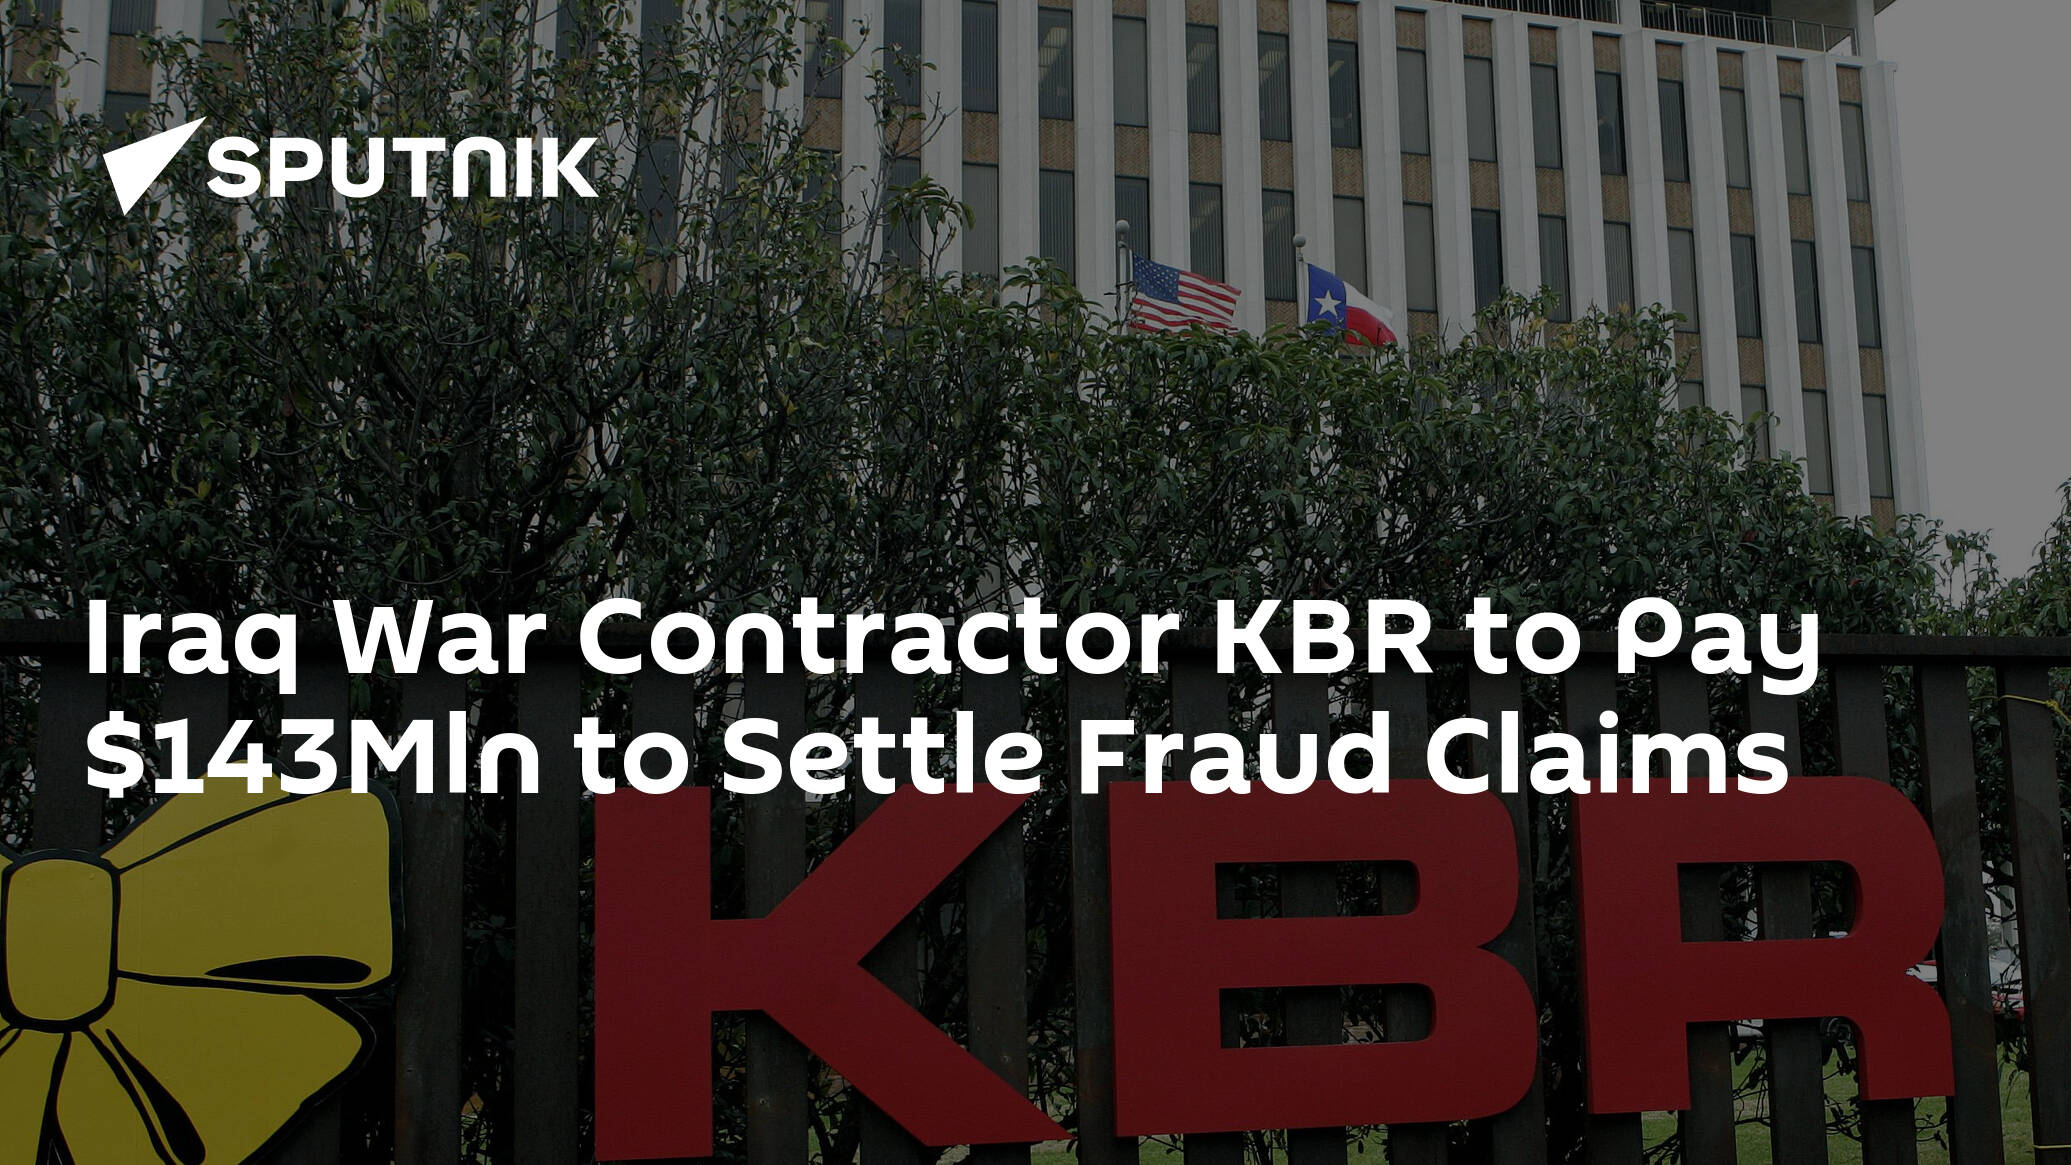 Iraq War Contractor KBR to Pay 3Mln to Settle Fraud Claims